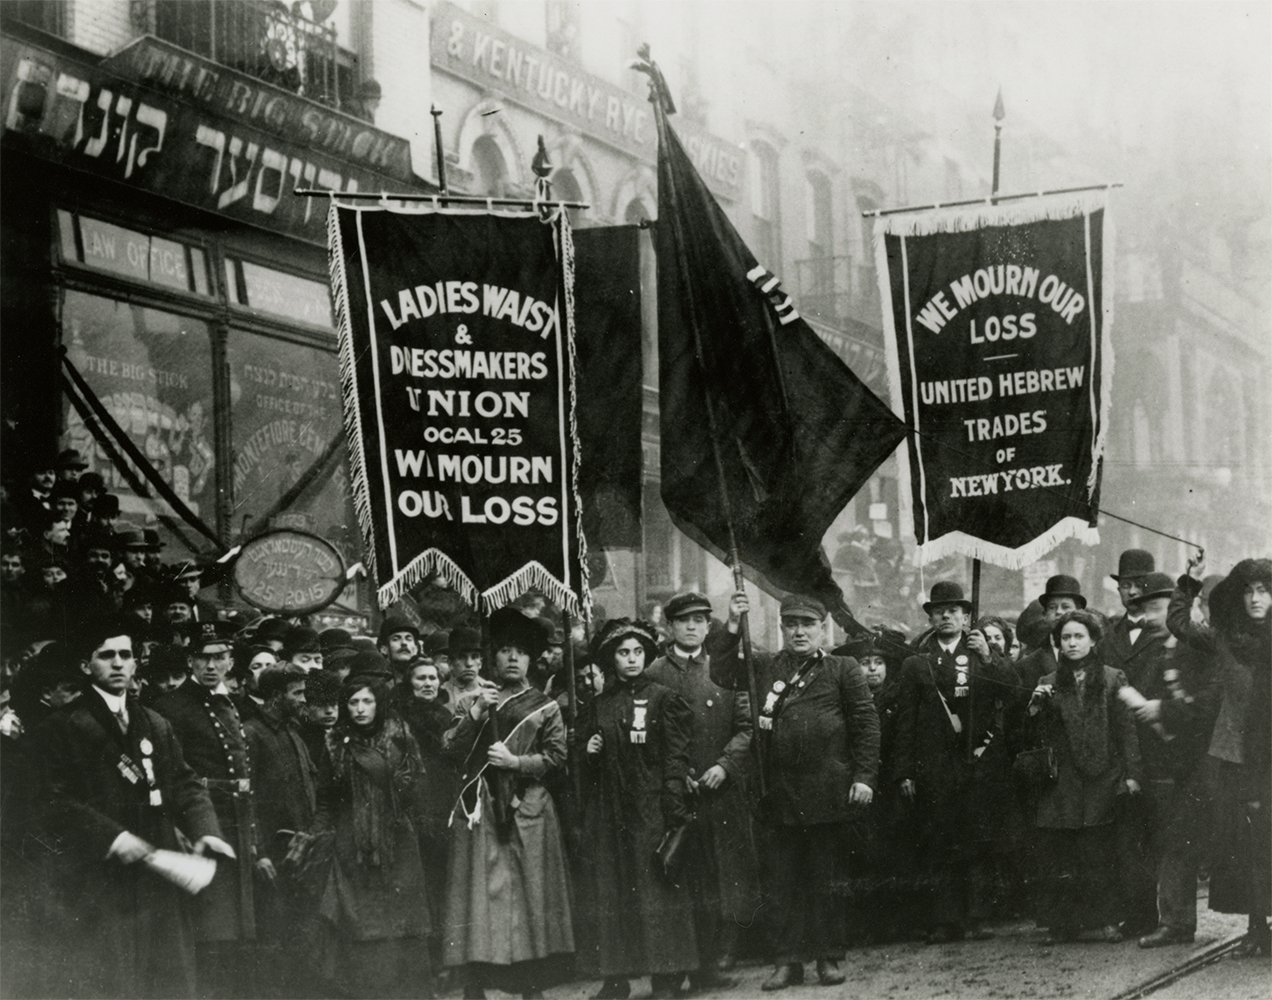 International Ladies’ Garment Workers’ Union protest after the Triangle Shirtwaist factory fire